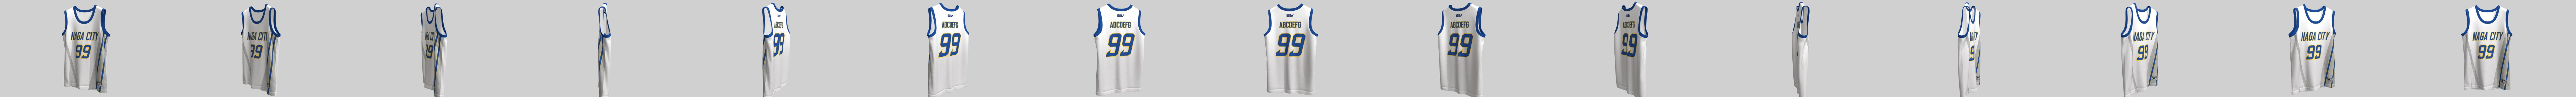 Basketball Jersey - Download Free 3D model by Sev (@sevclothing) [3ee634a]